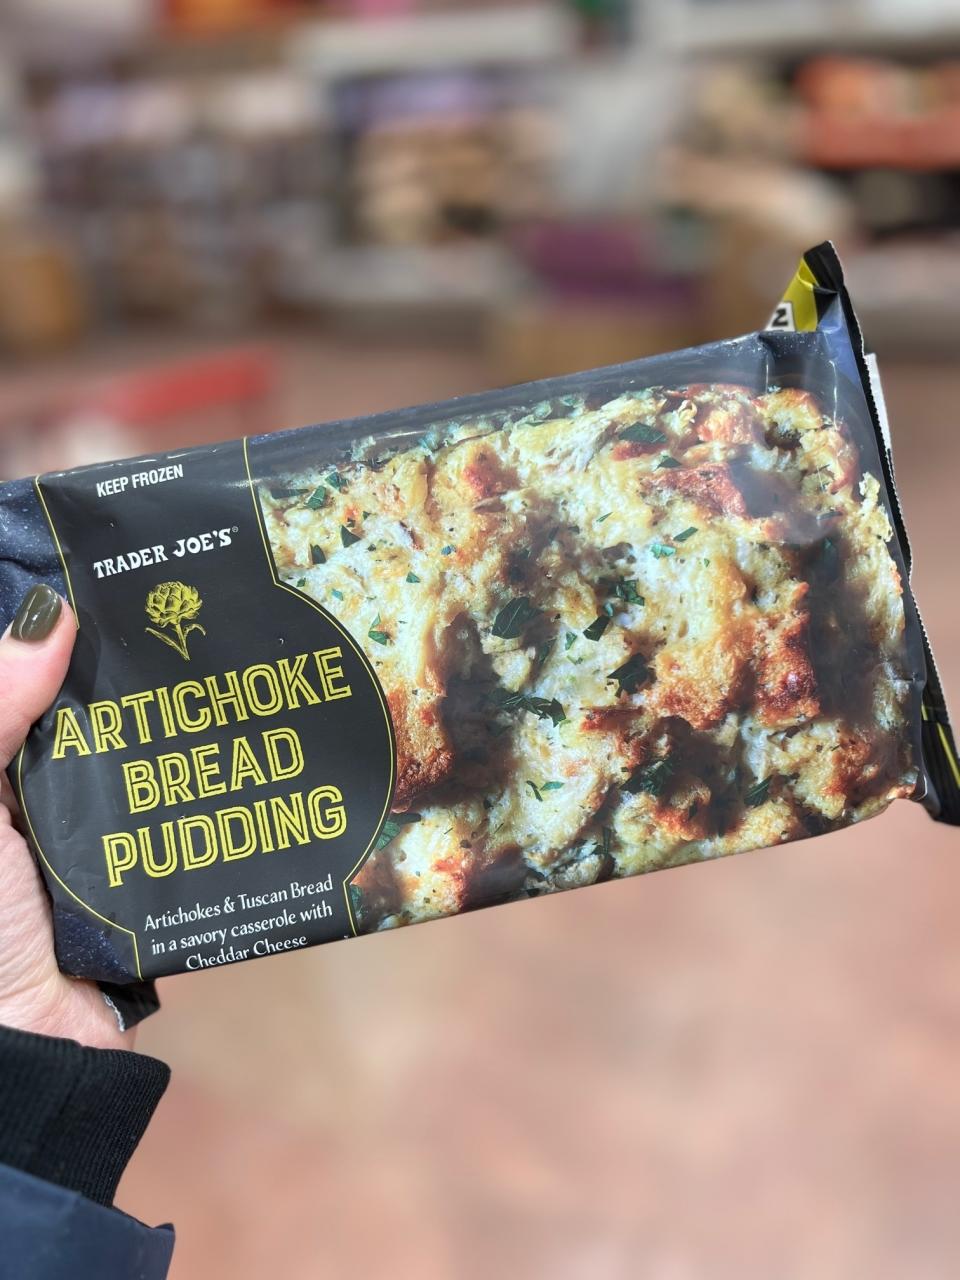 Hand holding Trader Joe's Artichoke Bread Pudding package in a store